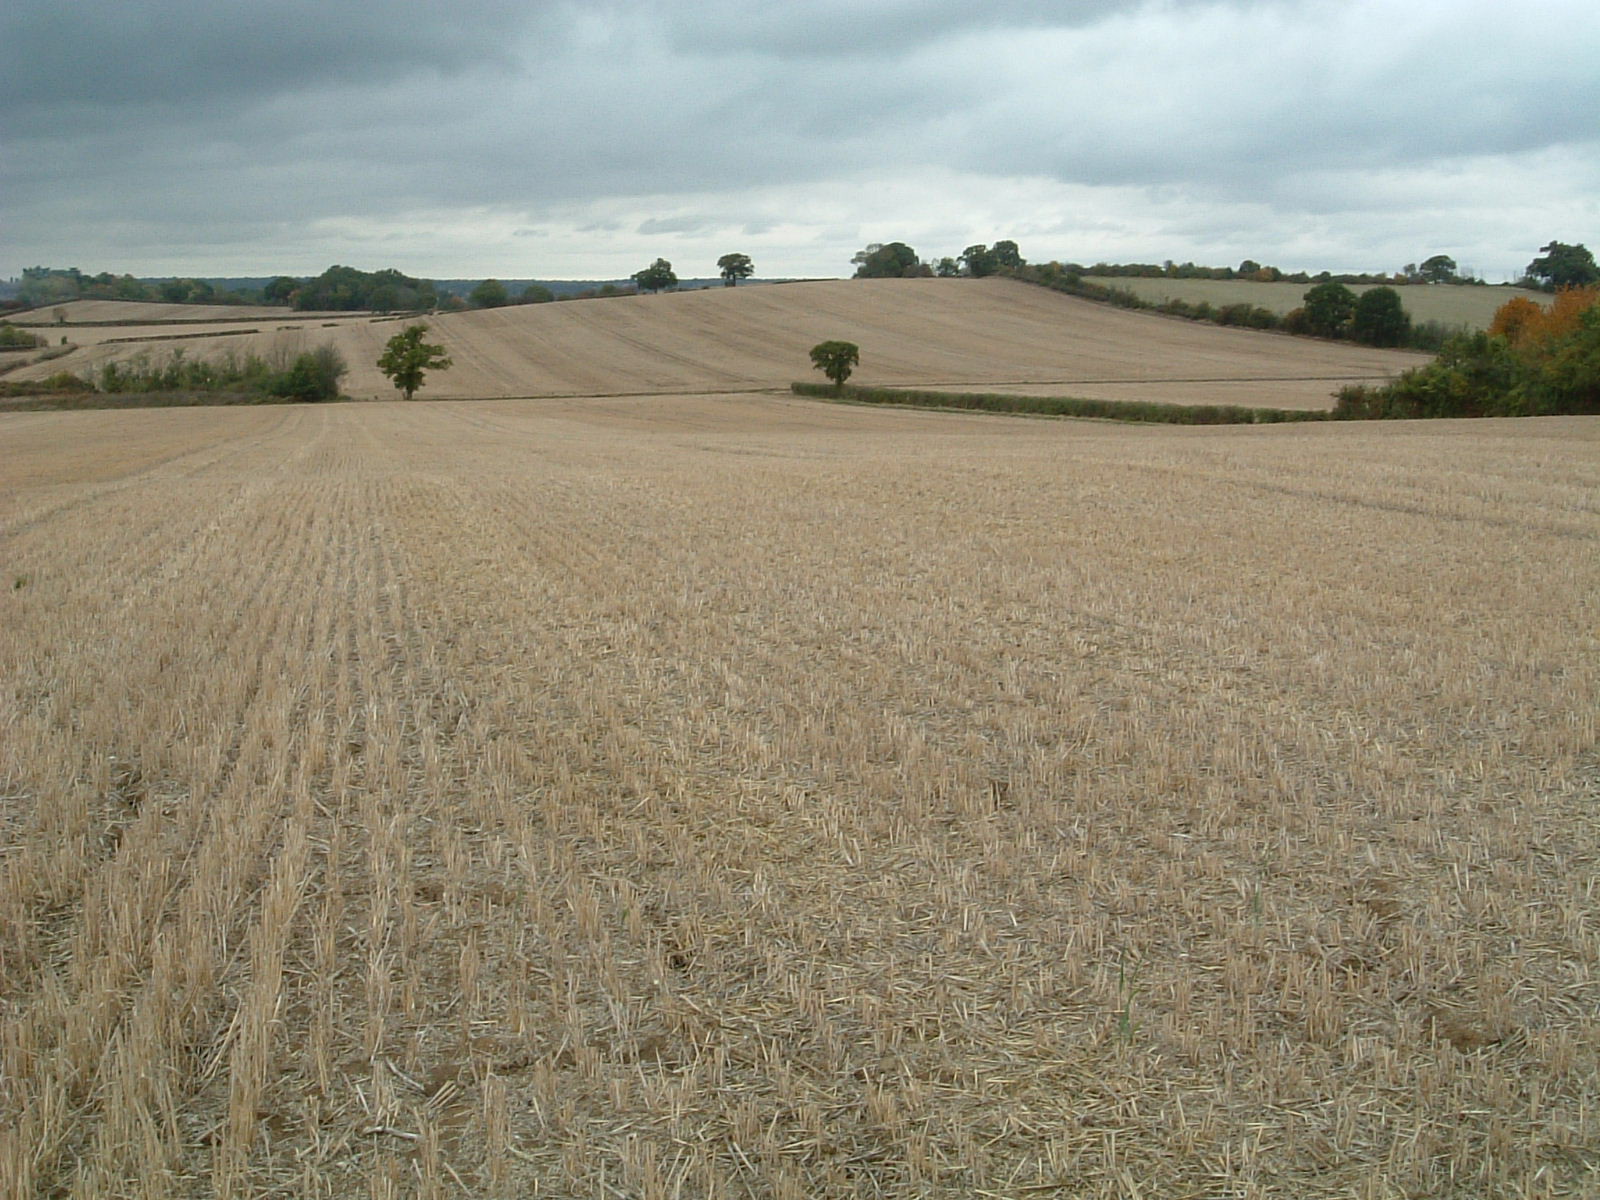 A field along the Three Forests Way